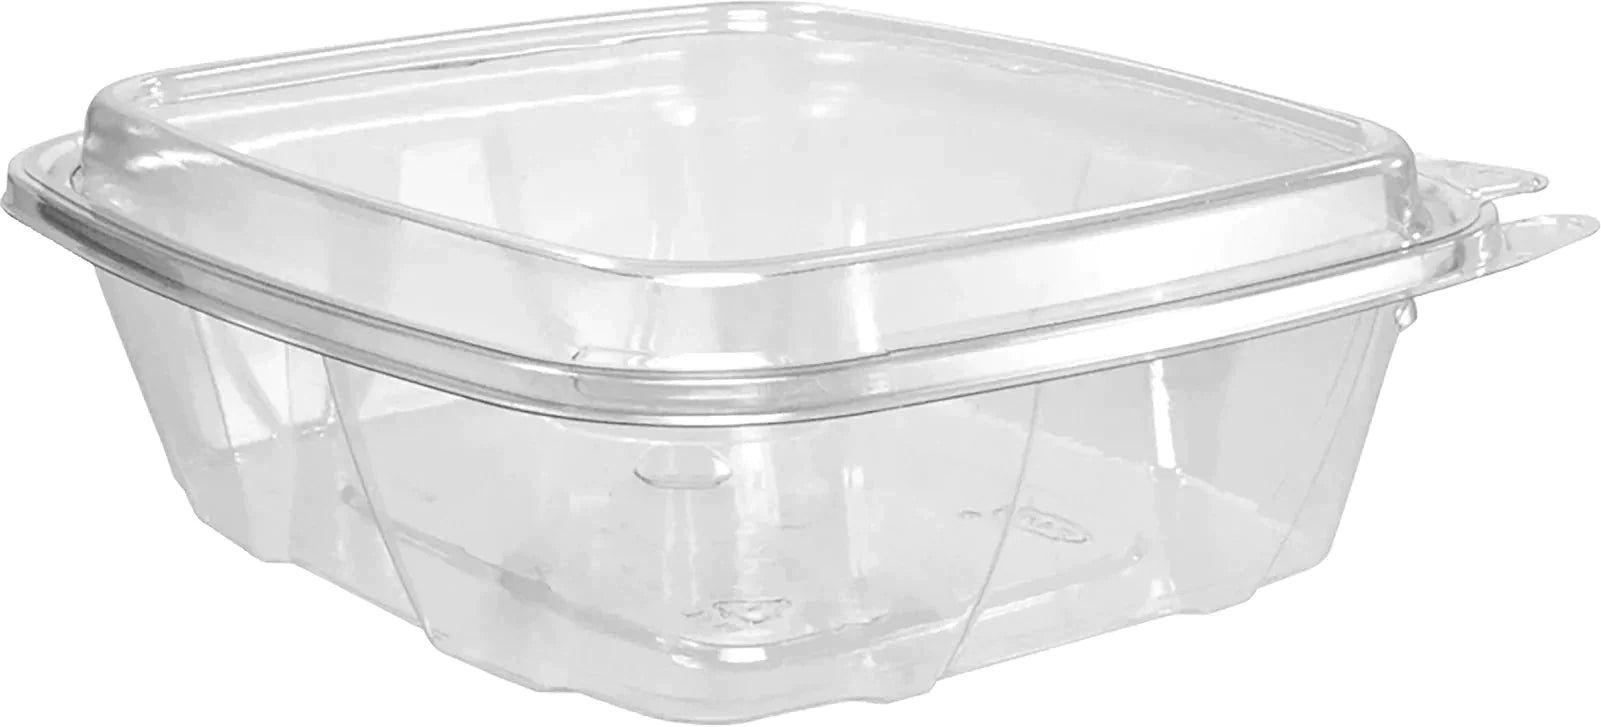 Dart Container - 12 Oz PET Plastic Tamper-Evident/Resistant Container With Clear Dome Lid, 200/Cs - CH12DED